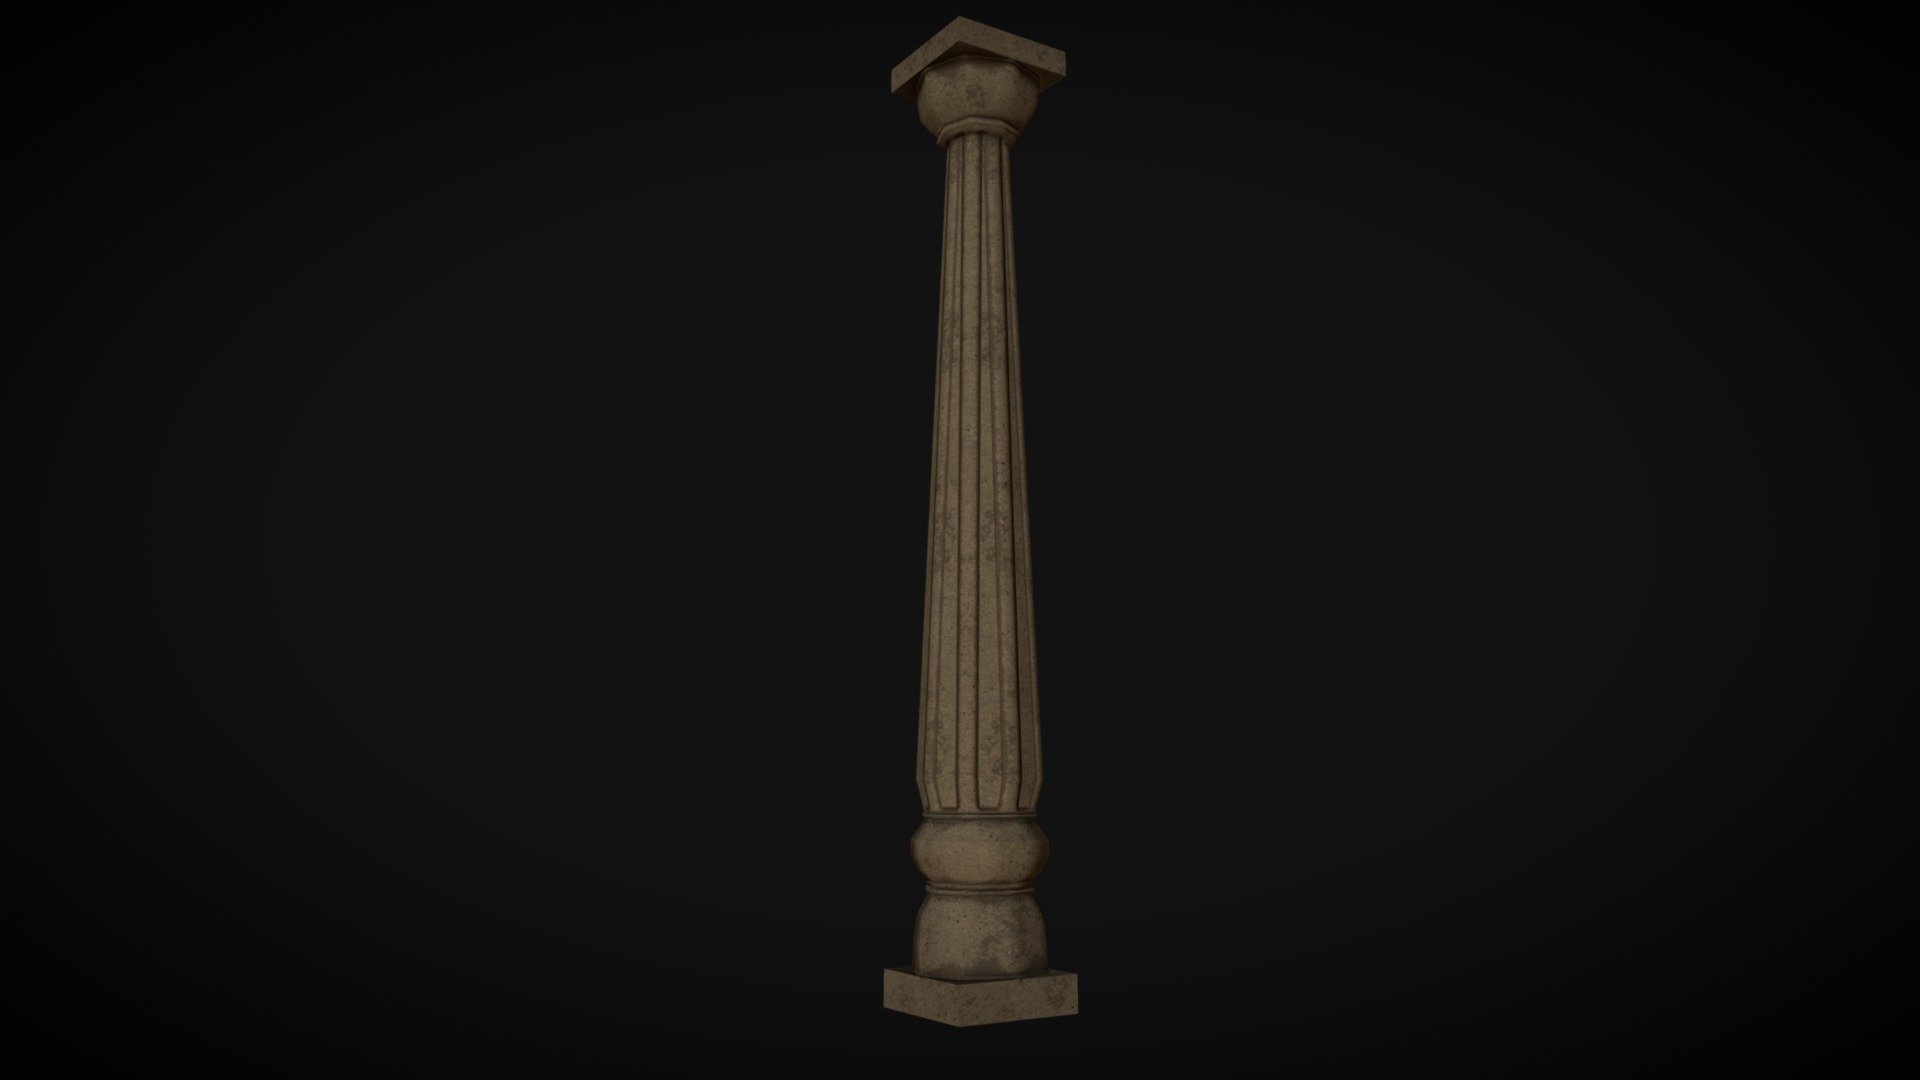 This pillar is created in 3ds max and it's a low poly model. Texture creatrion part done in substance painter 3d model